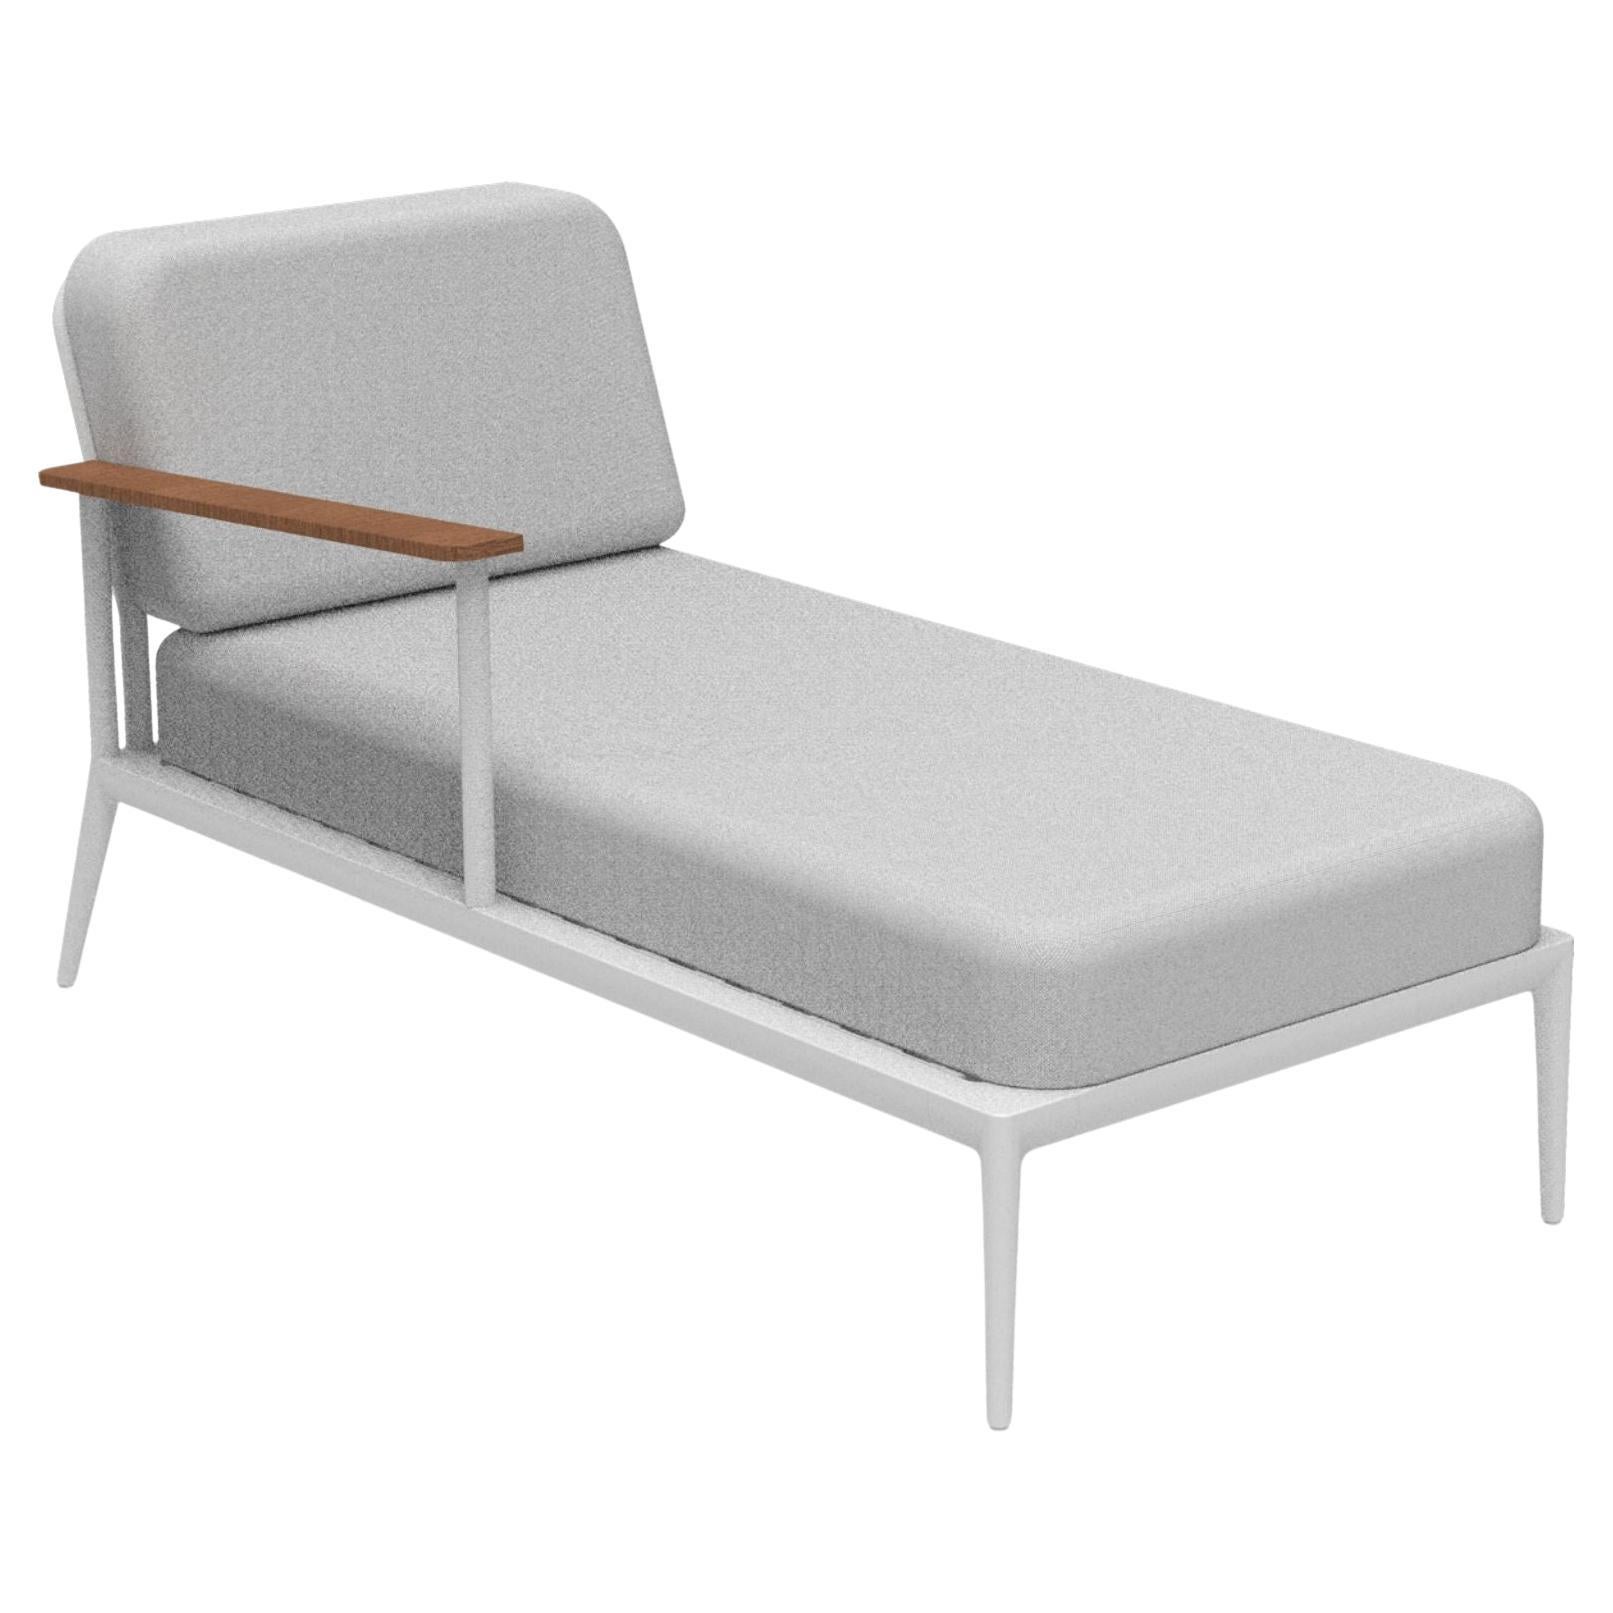 Nature White Right Chaise Lounge by Mowee